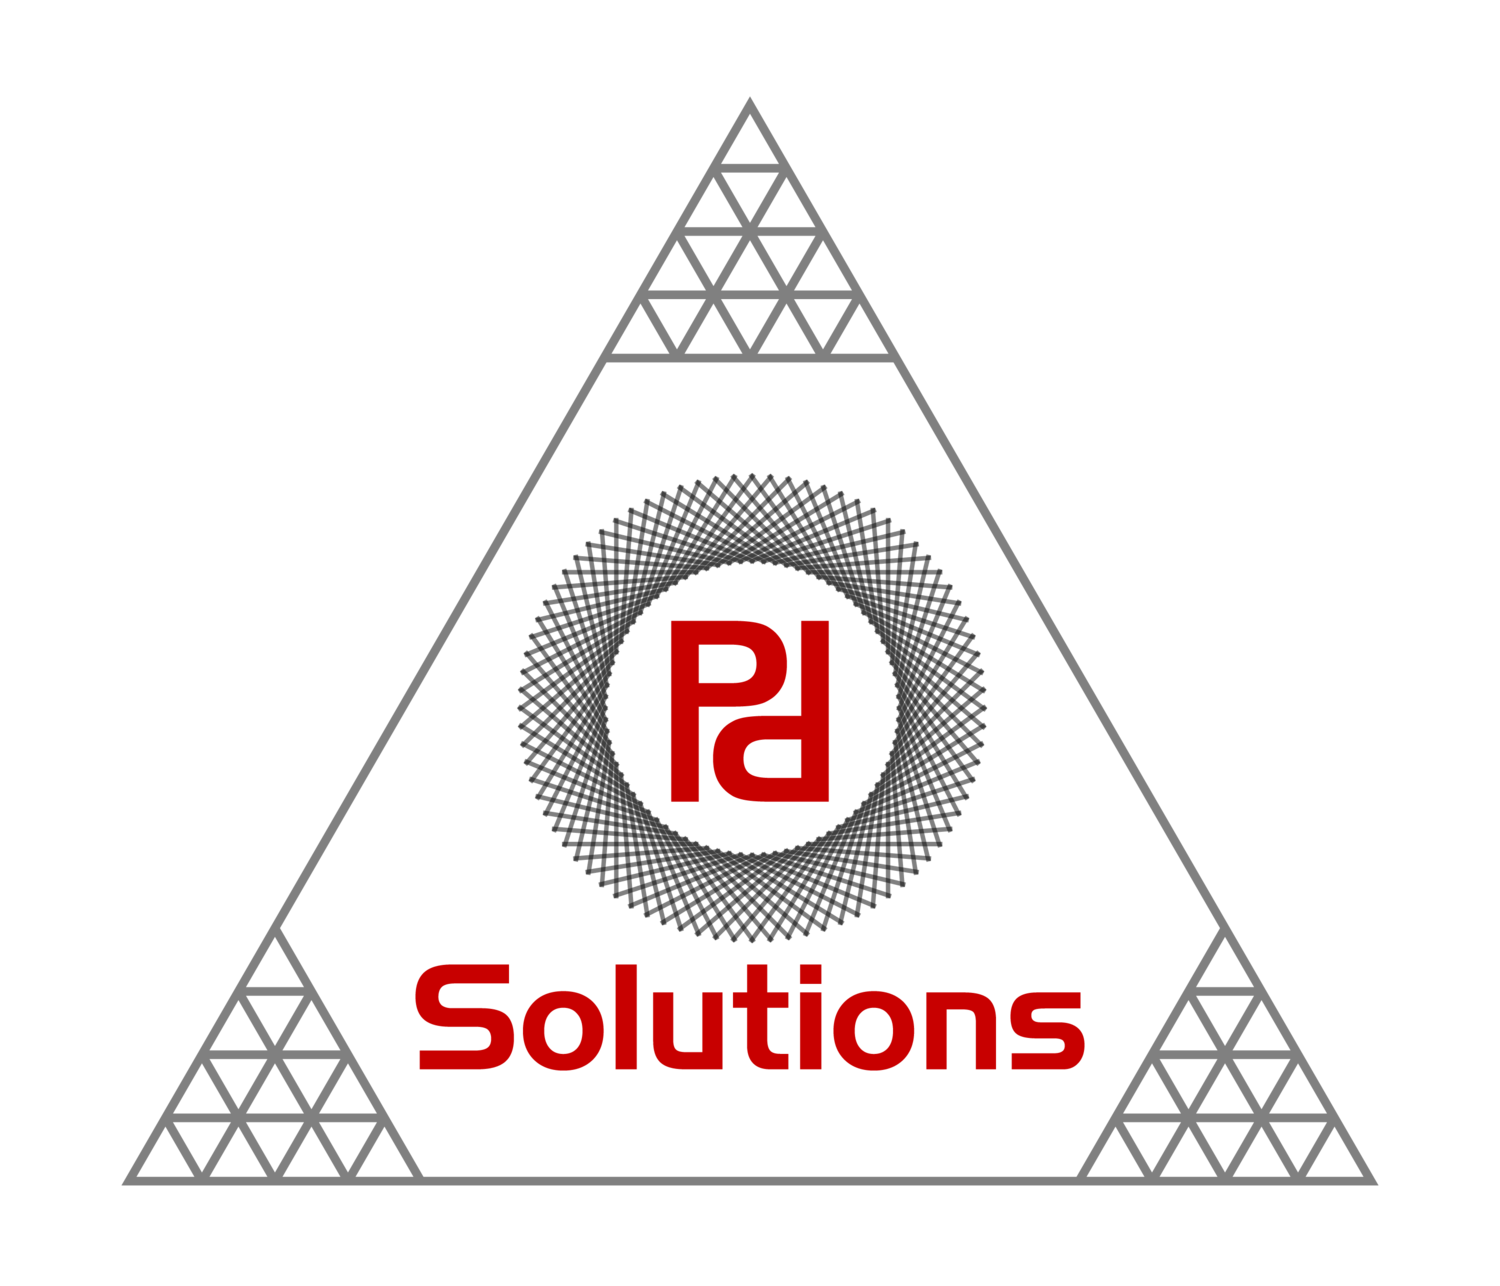 Private Public Solutions | 8a Certified | (202) 876-8907